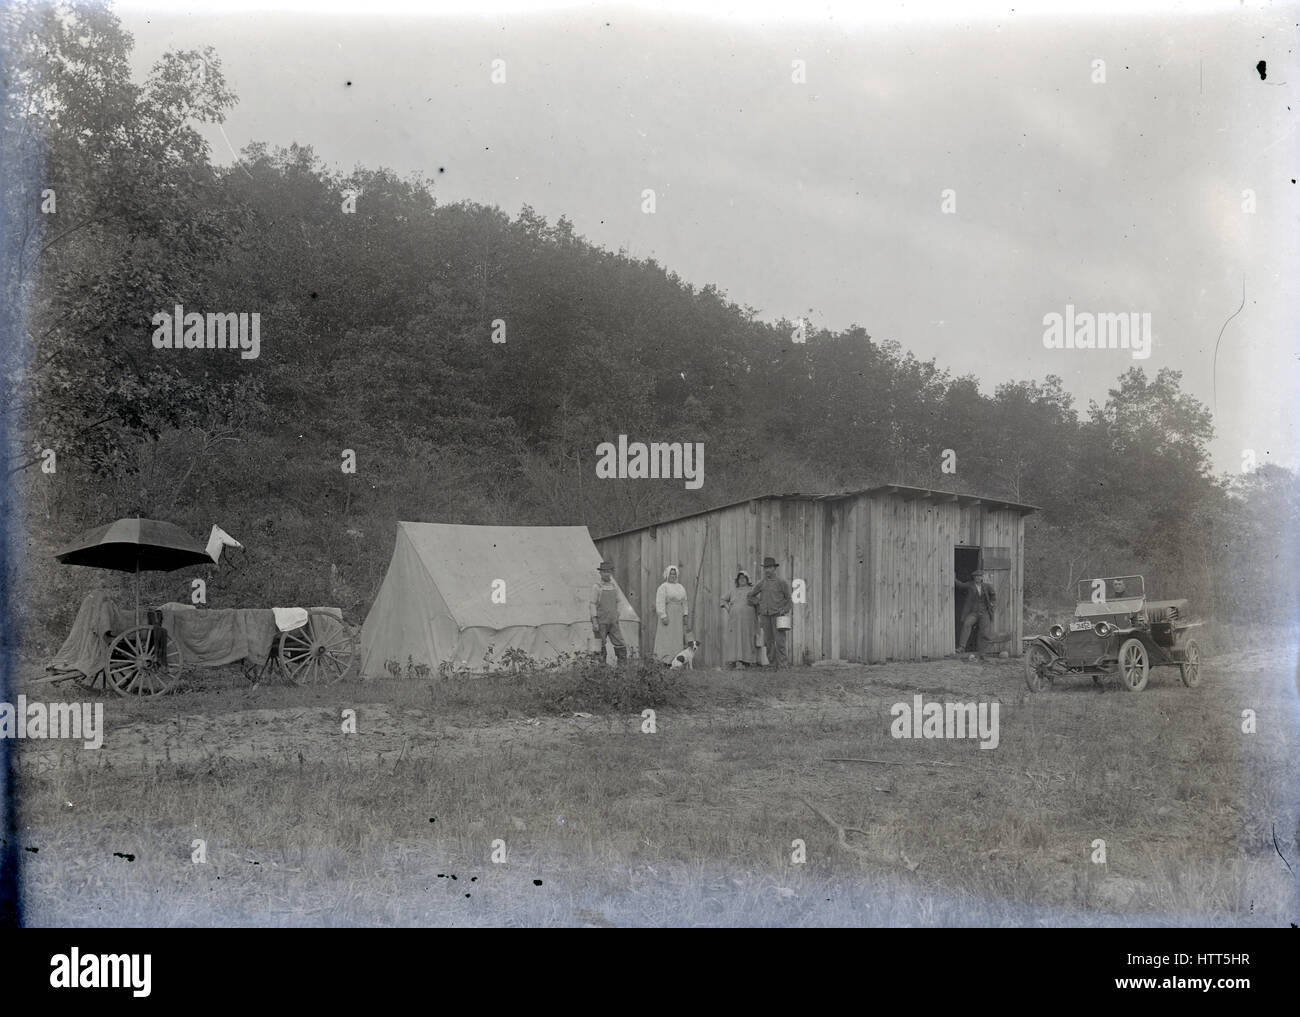 Antique c1914 photograph, men and women in a roadside wagon, tent, and wooden structure. The vehicle is a Studebaker with 1914 Michigan license plates. Location is Michigan, USA. SOURCE: ORIGINAL GLASS NEGATIVE. Stock Photo